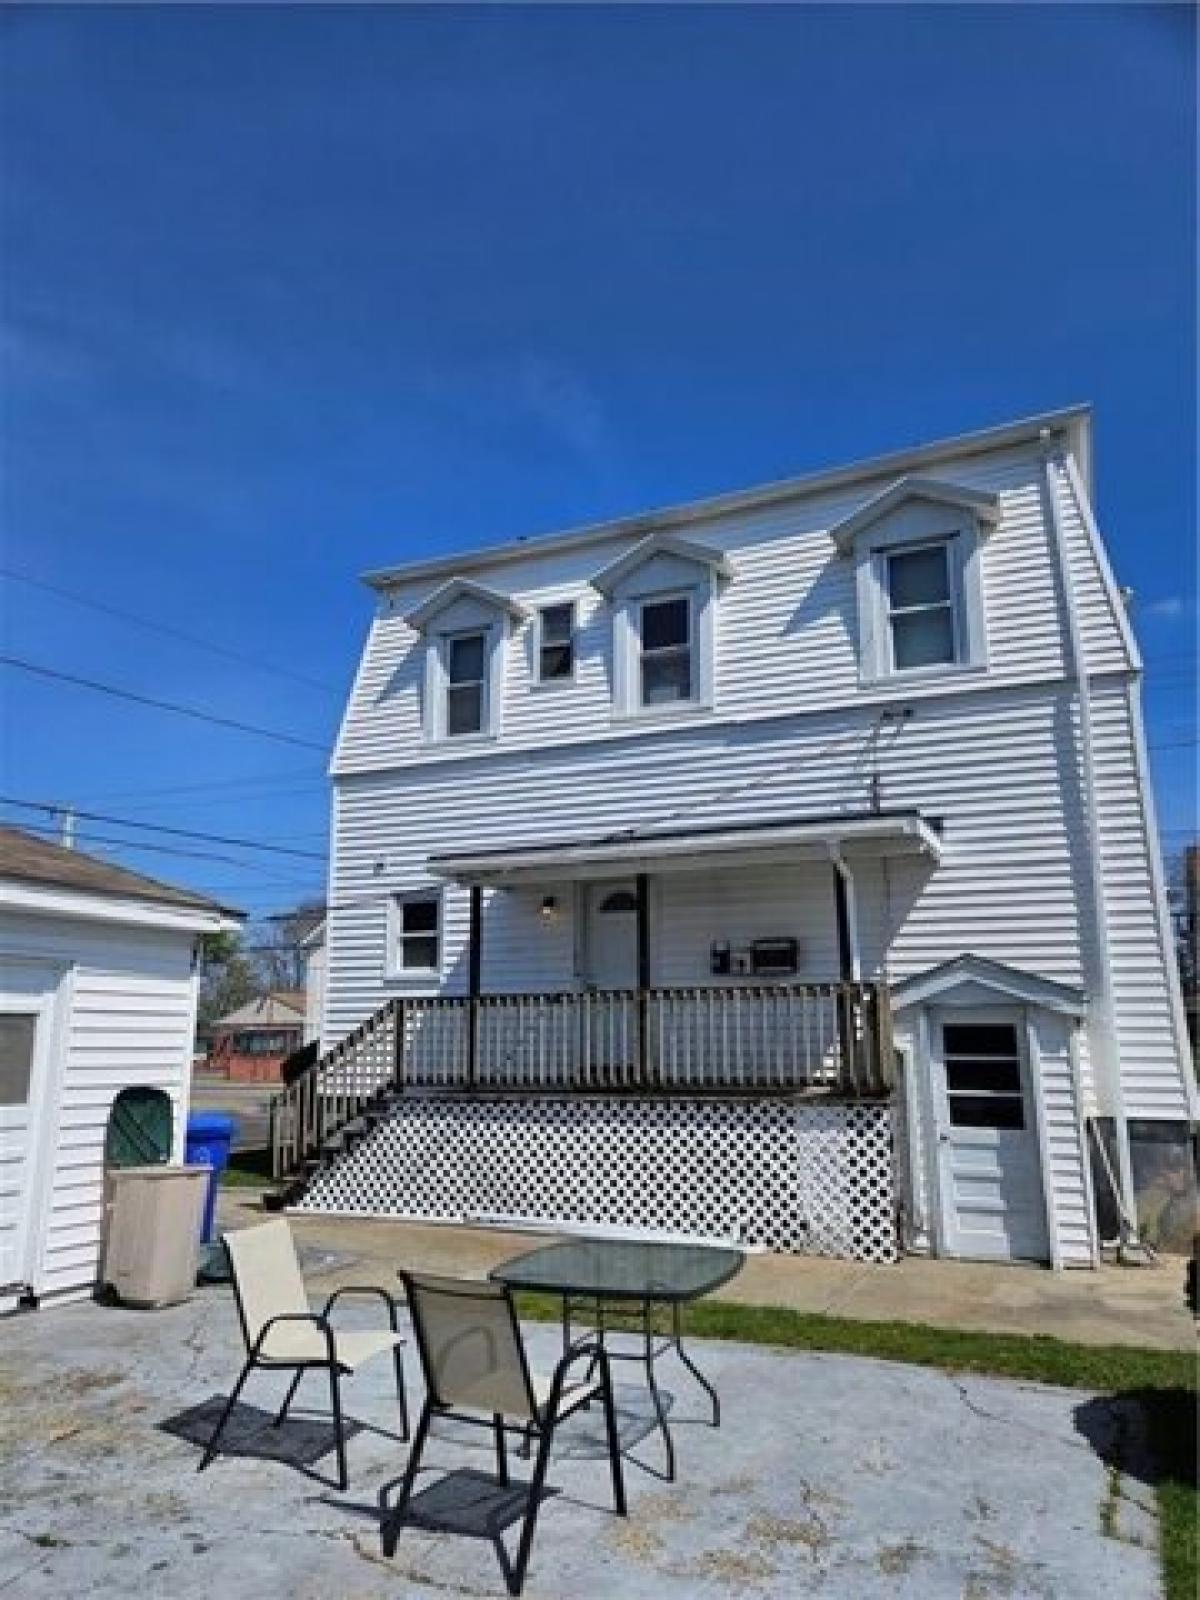 Picture of Home For Sale in East Providence, Rhode Island, United States